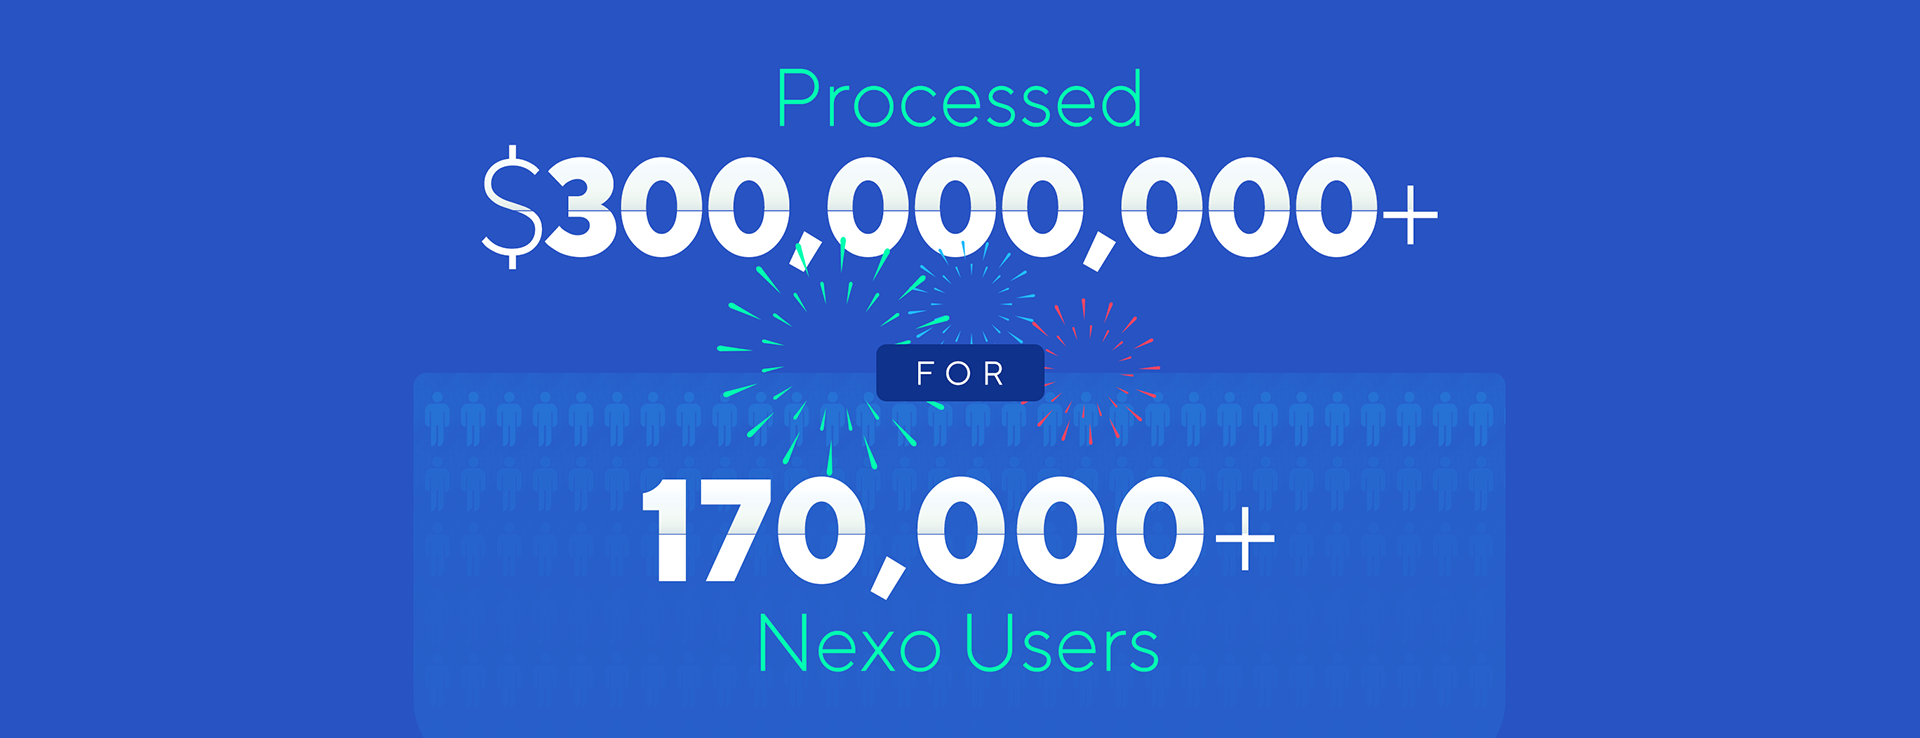 $300M+ in 7 Months for 170,000+ Nexo Users